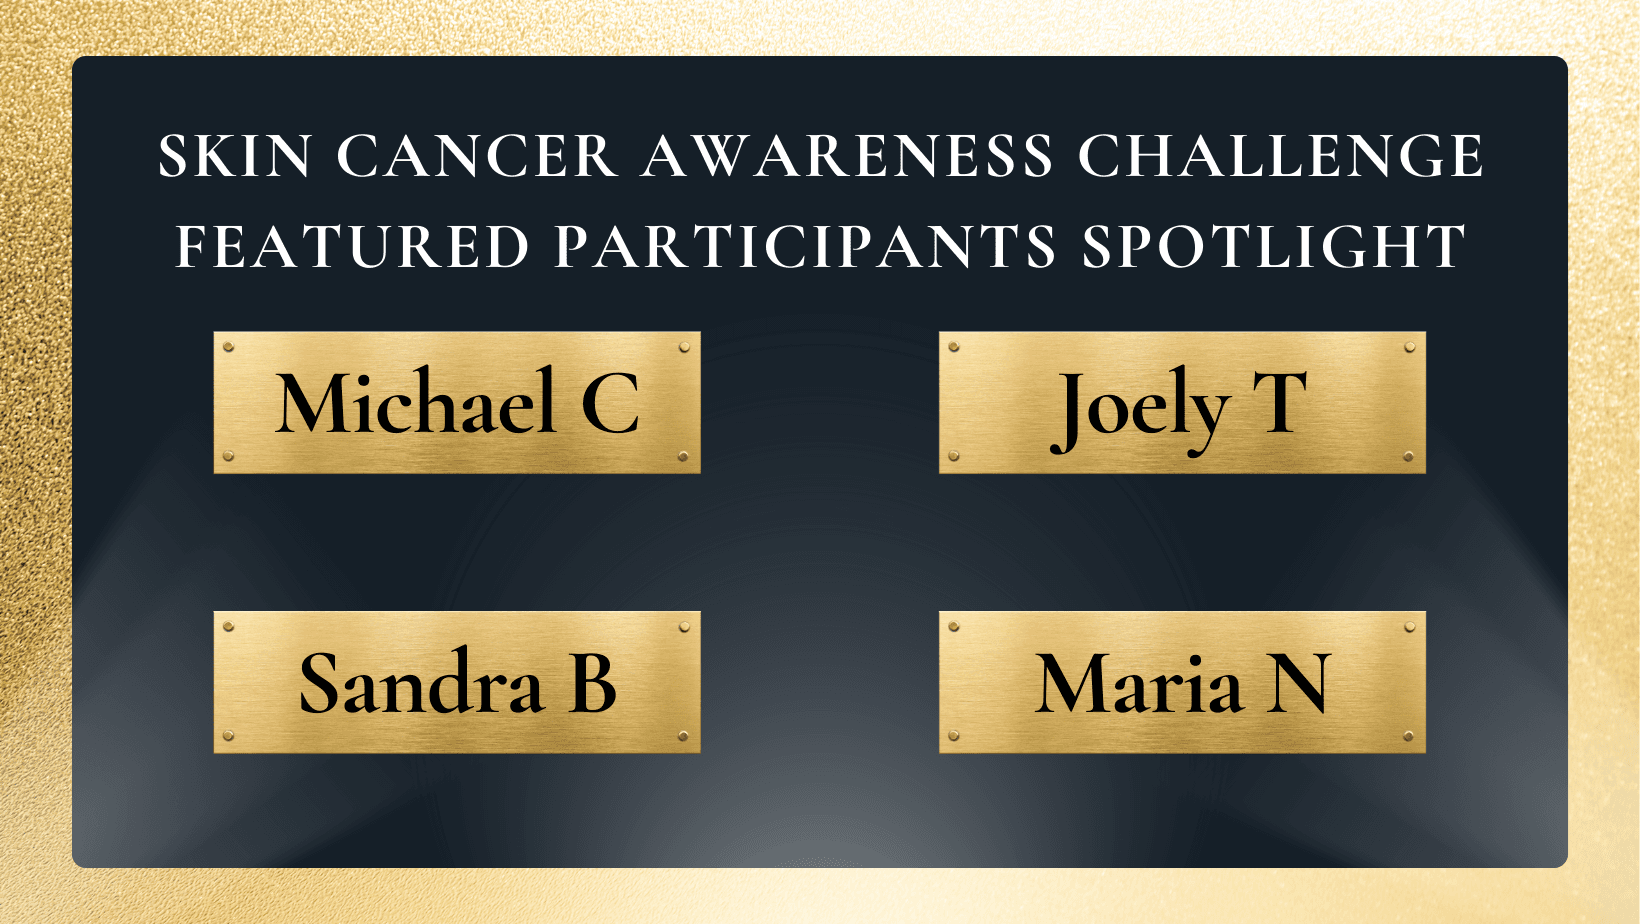 https://storage.tally.so/895f0996-d642-4c68-b593-2b3f455d3904/Skin-Cancer-Featured-Participants-Spotlight.png